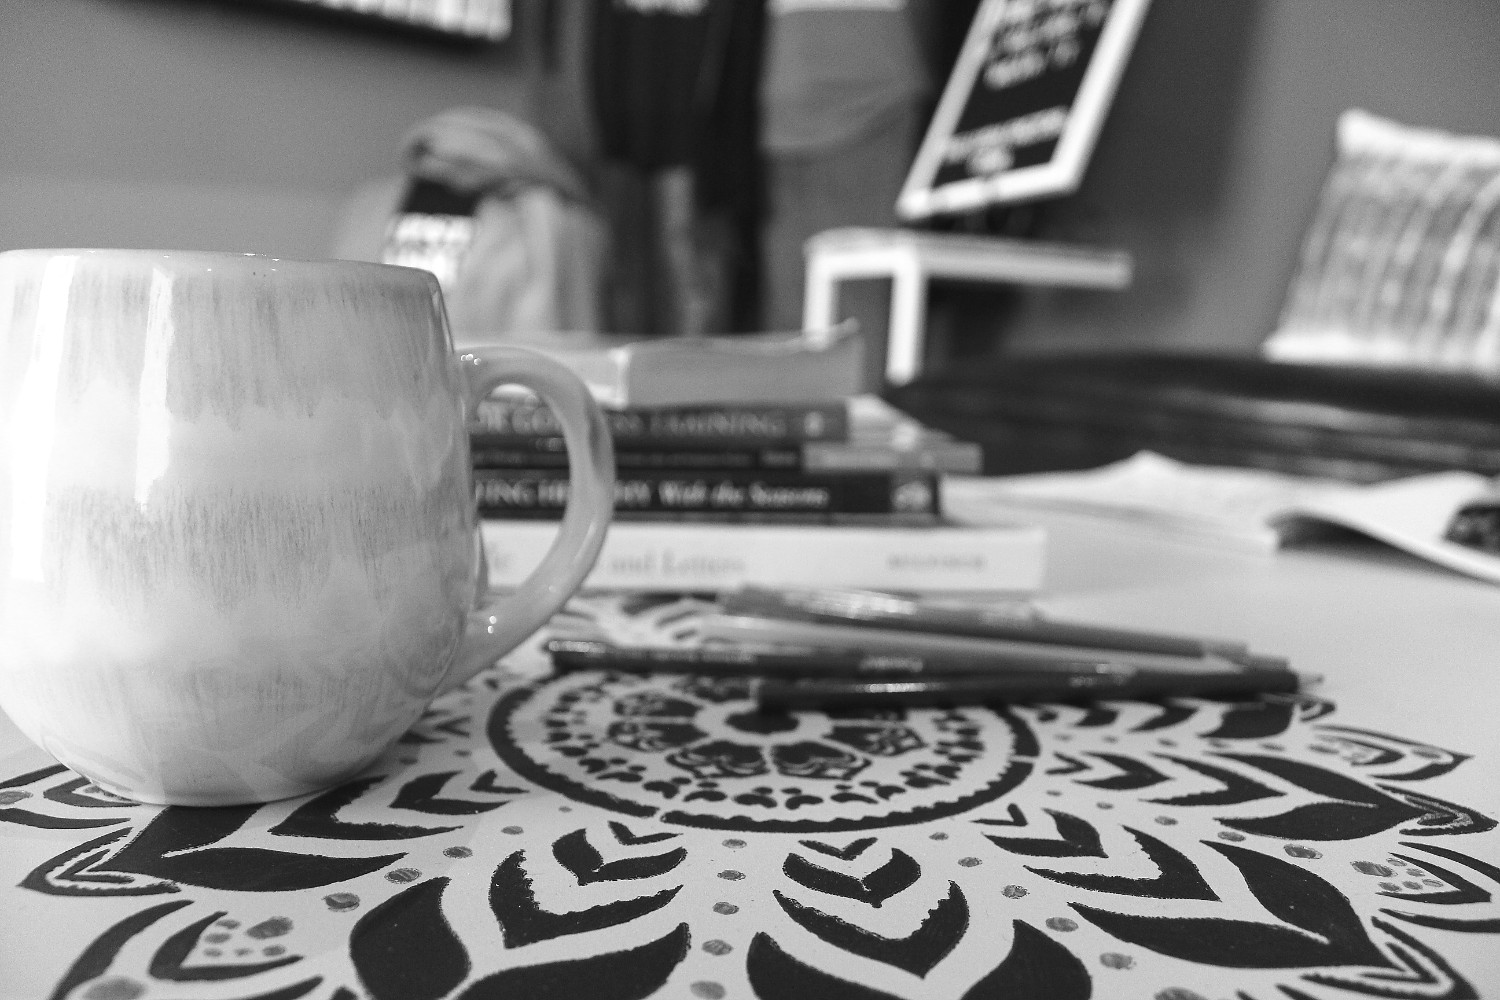 A coffee mug, books, and coloring books make patients feel at home.